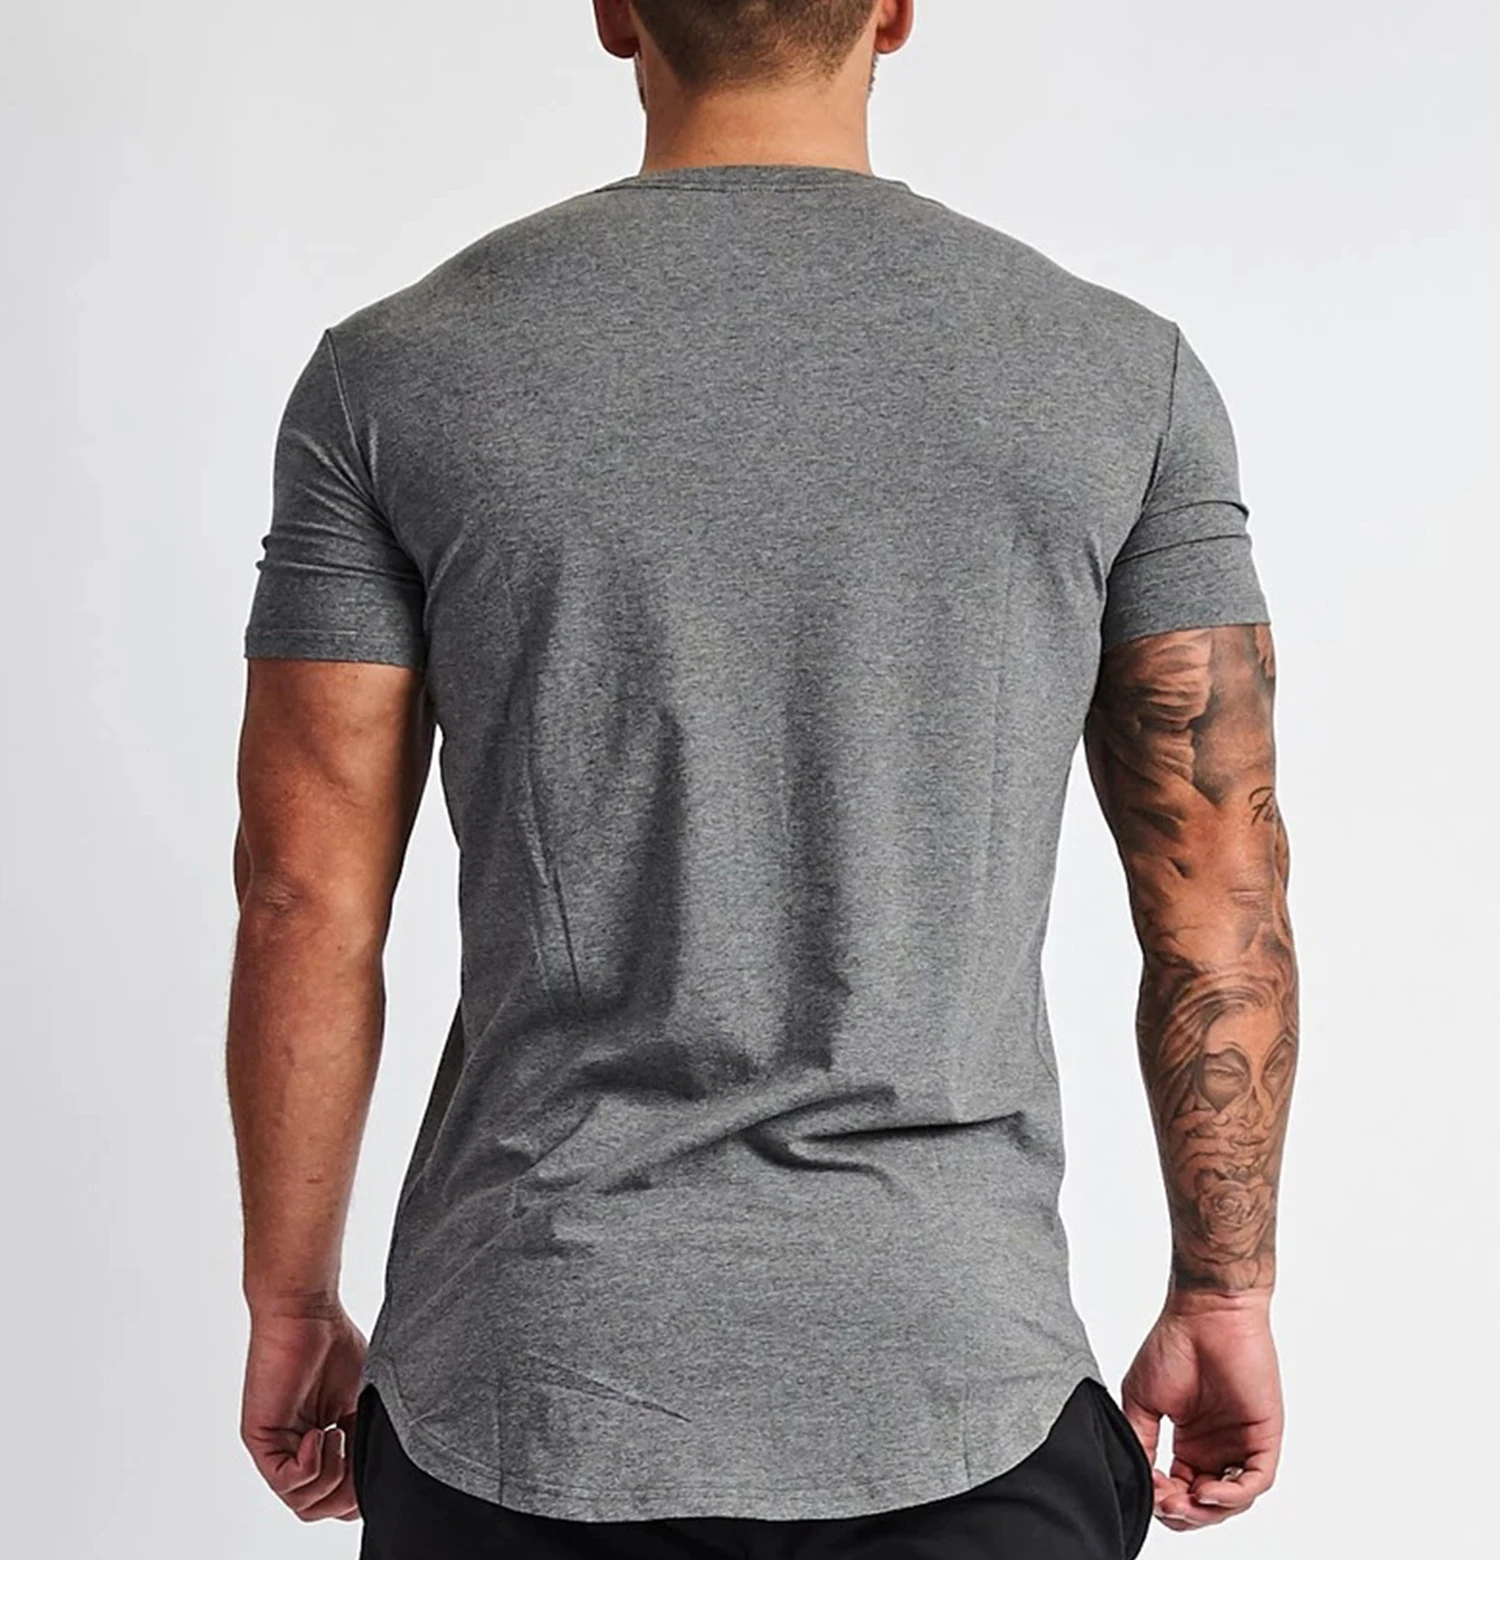 Vandq Muscle Mens Shortsleeve T Shirts Workout Casual Sports Running ...